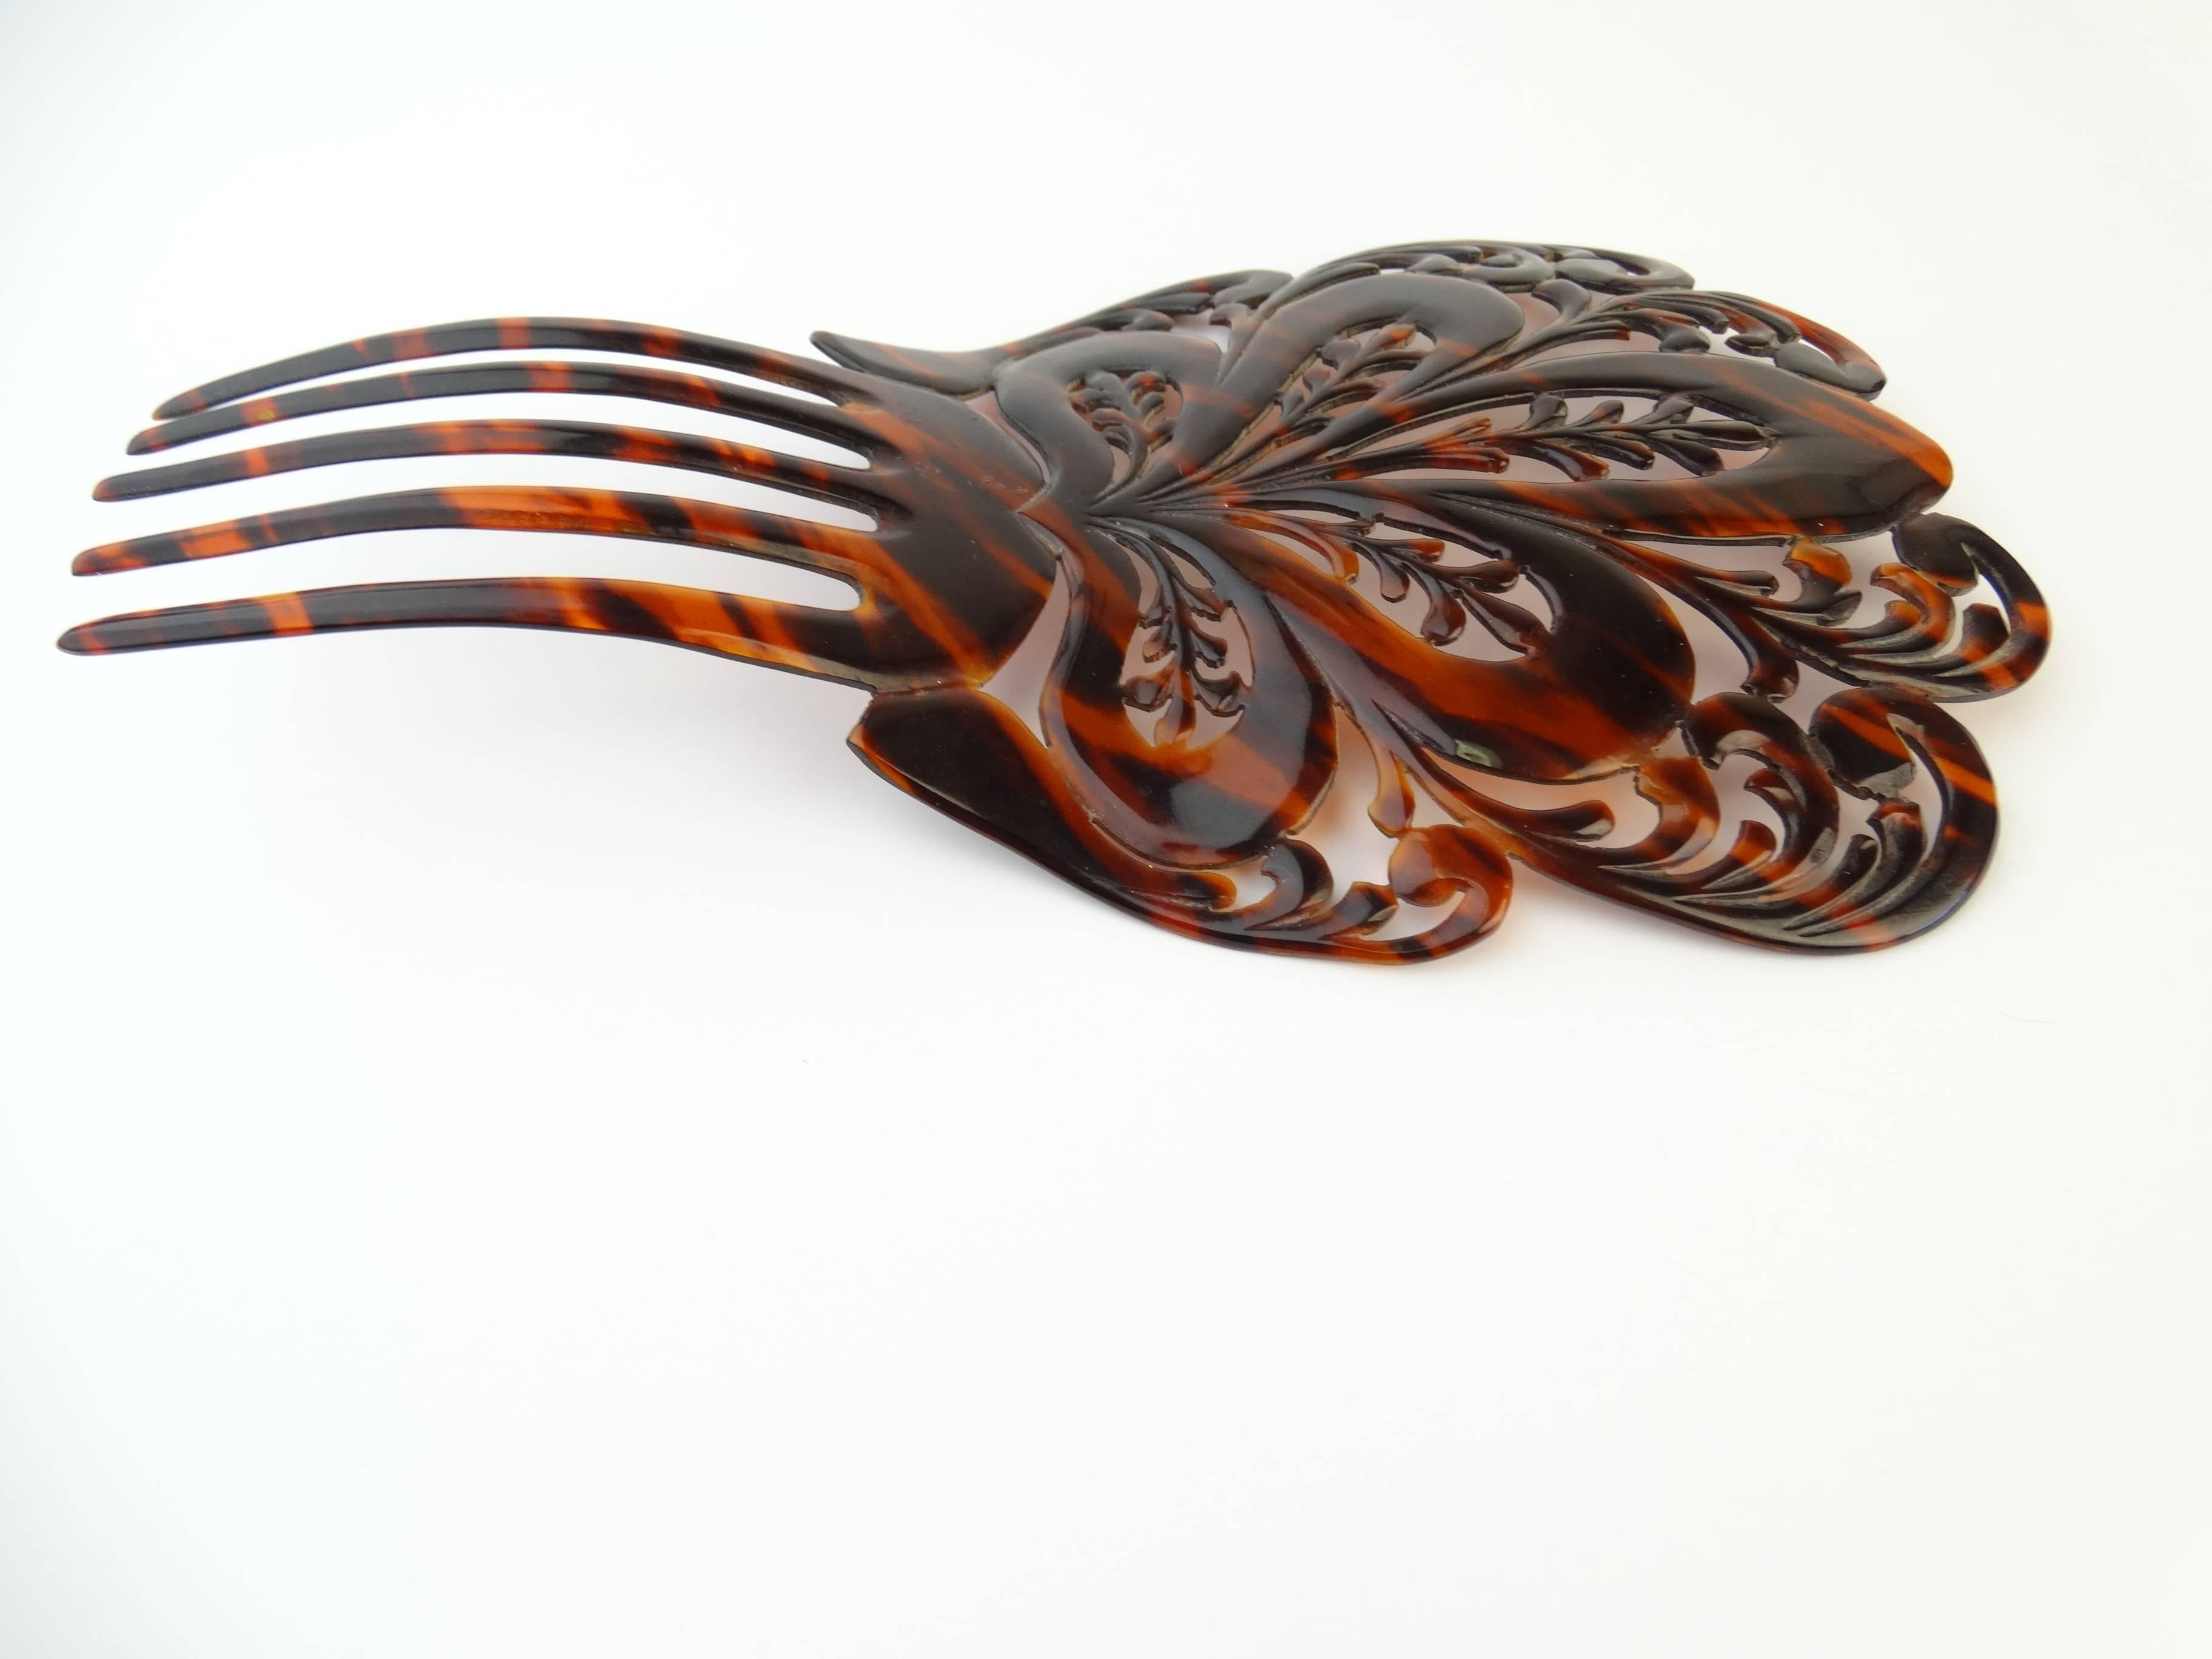 A very beautiful Spanish mantilla style hair comb in faux tortoiseshell effect, made of celluoid. Very large in scale, beautifully detailed. This comb has been carved out of one large piece of attractive natural material which has a distinctive